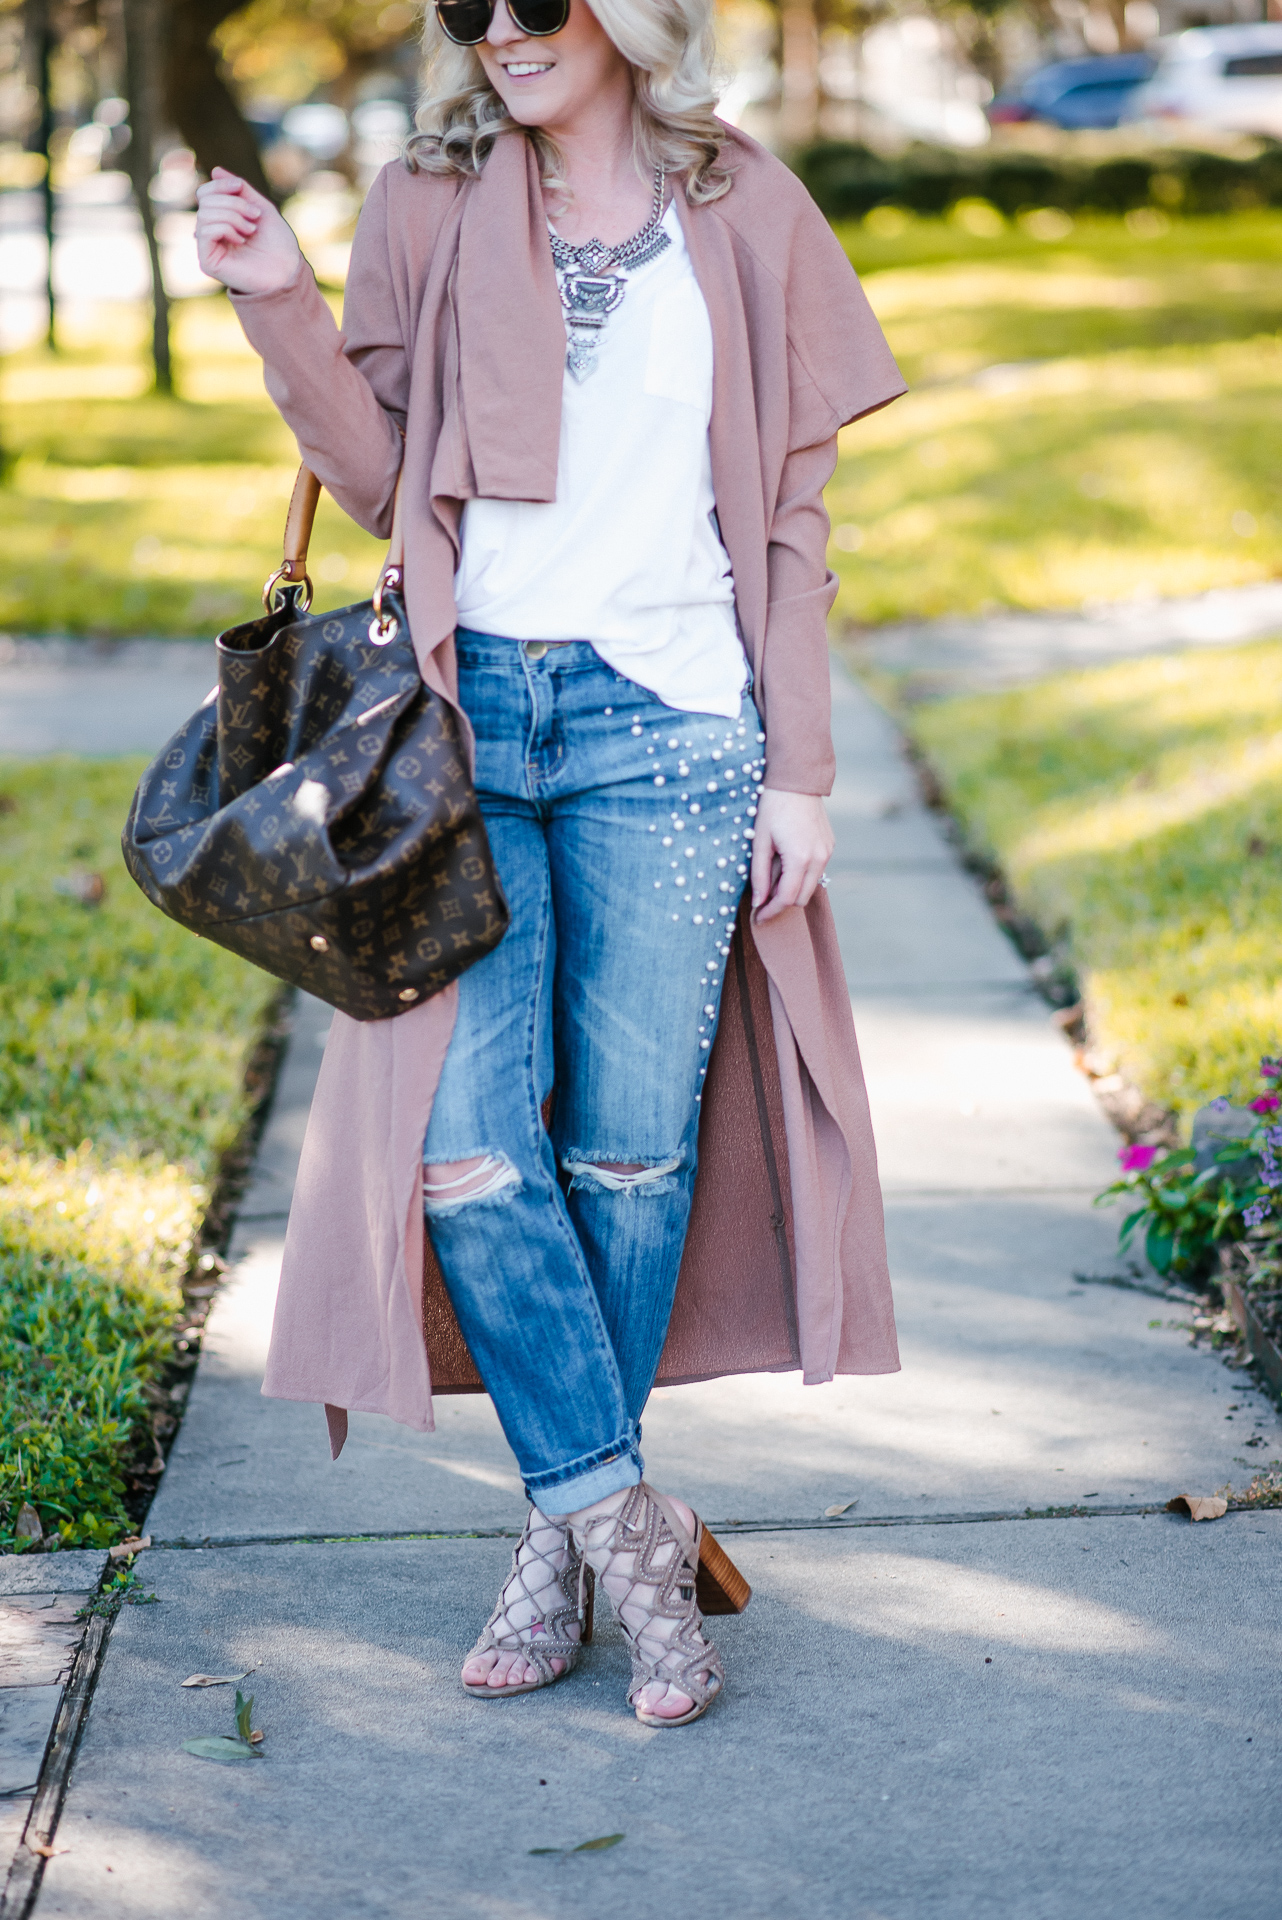 Fall Staples & Pearl Embellished Jeans by Houston fashion blogger Gracefully Sassy